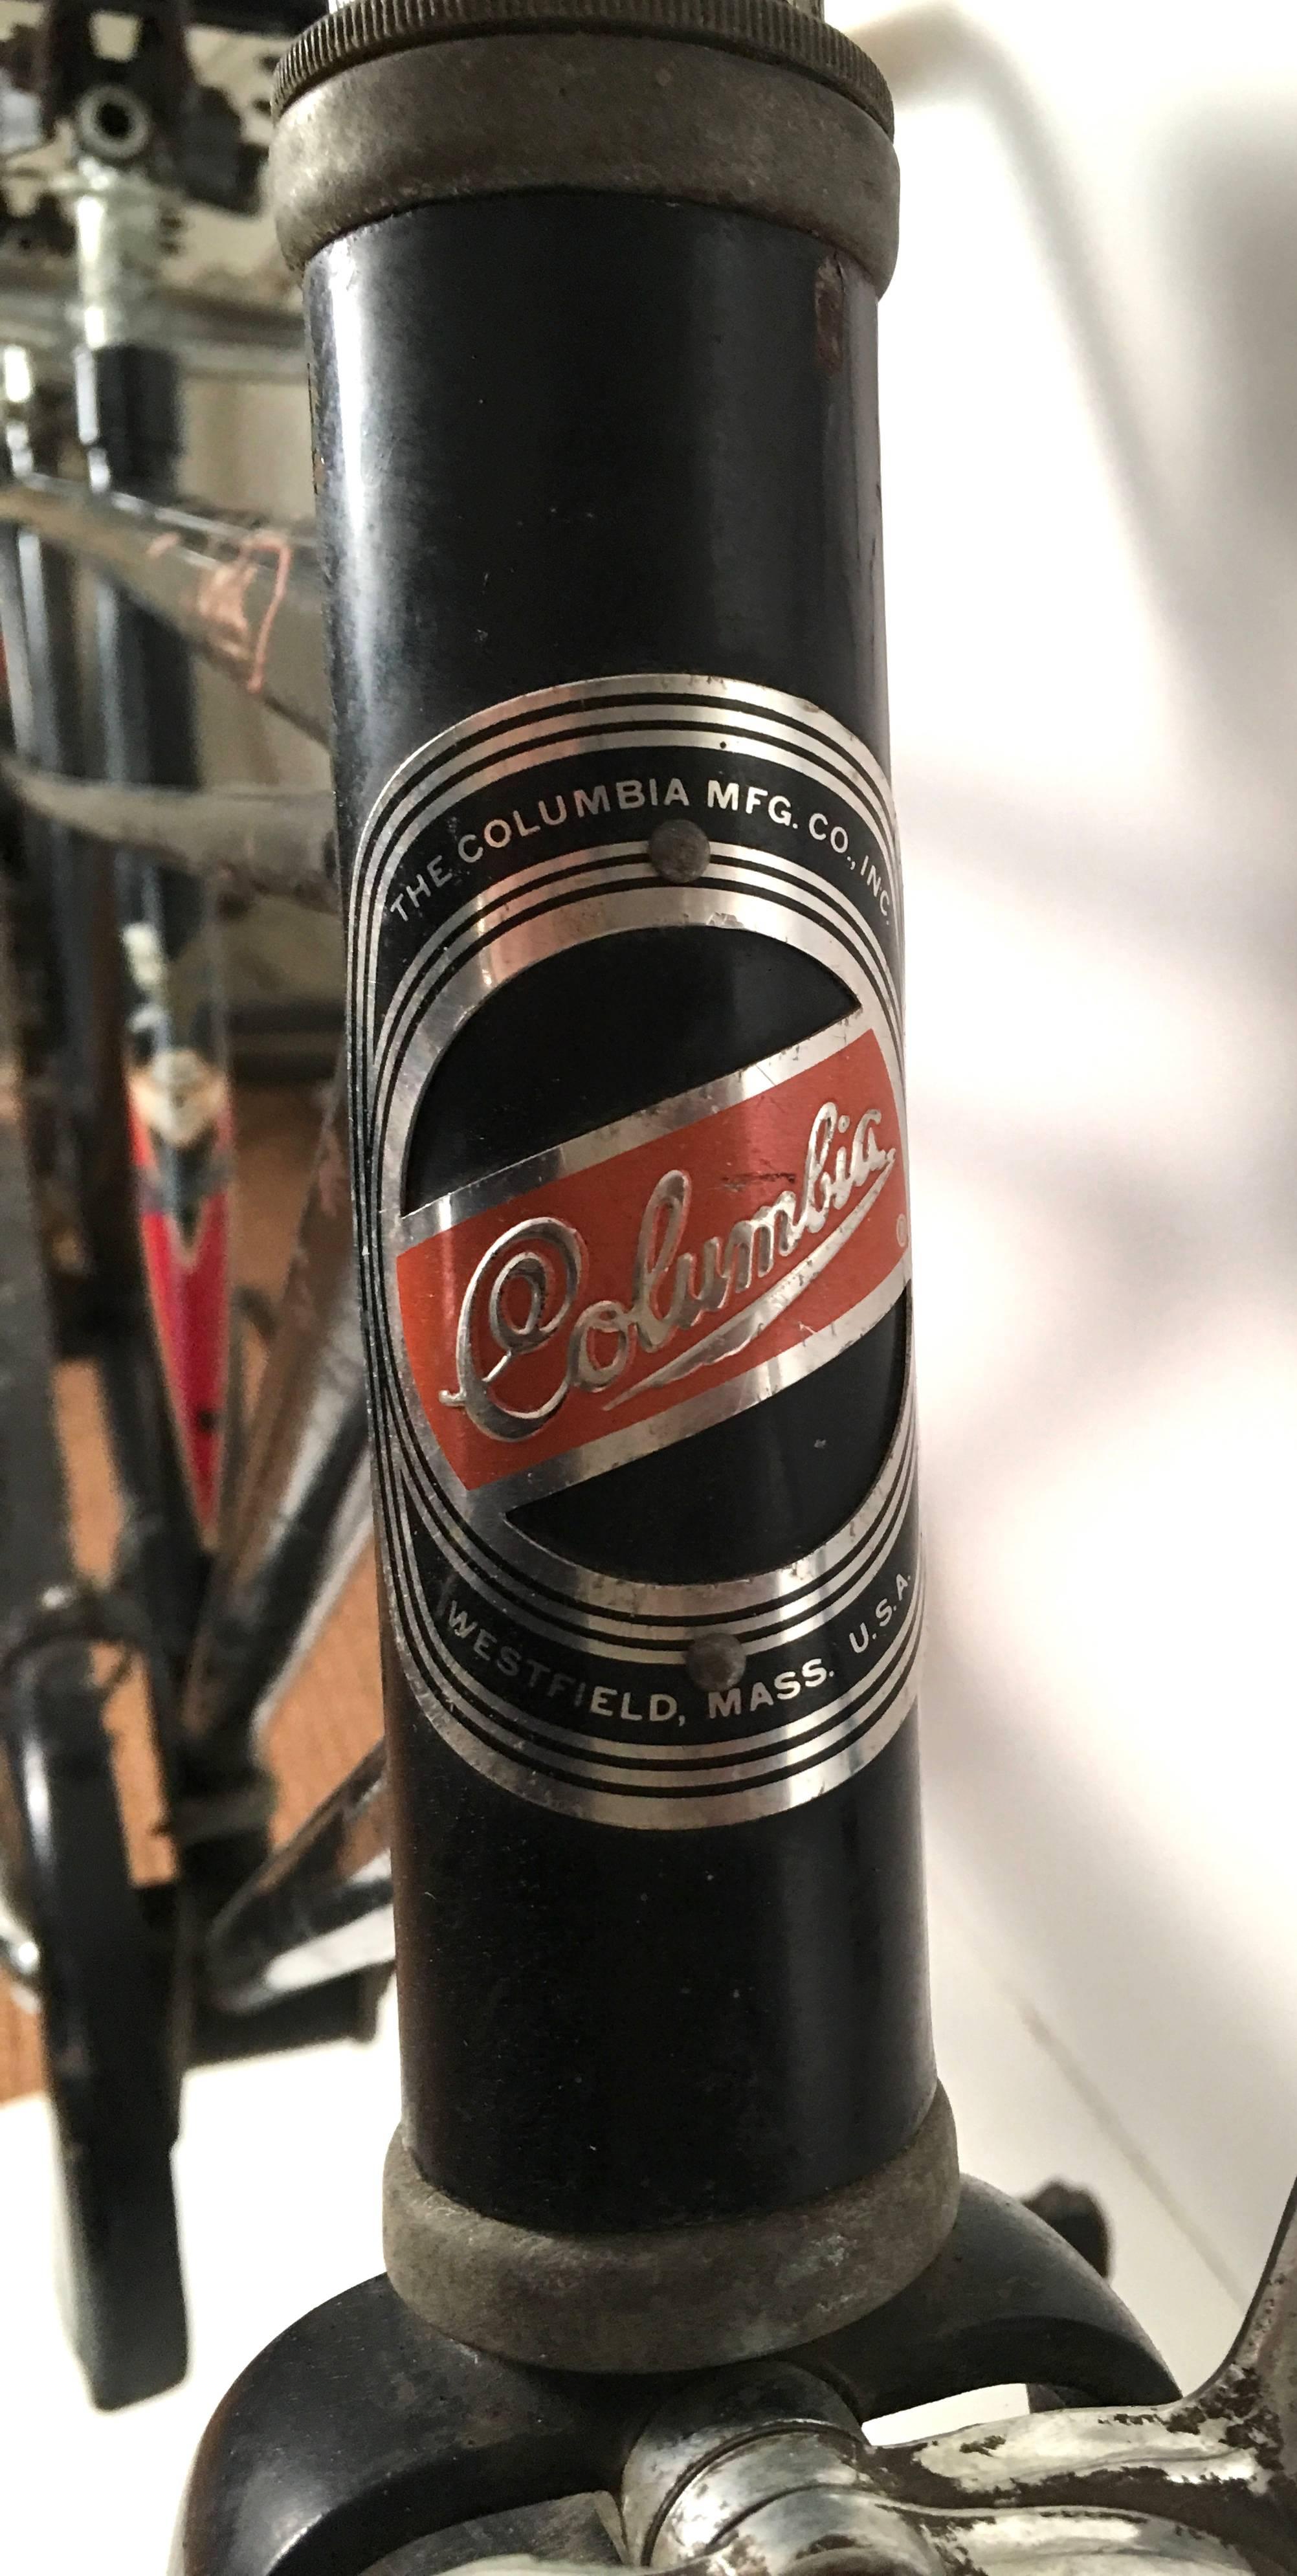 A rare Columbia four seat tandem bicycle, made in Westfield, Massachusetts, circa 1964, with black-painted frame with original decals, pinstriped front and rear fenders, white-wall tires, front brake, black and white seats, and a three-chain drive.